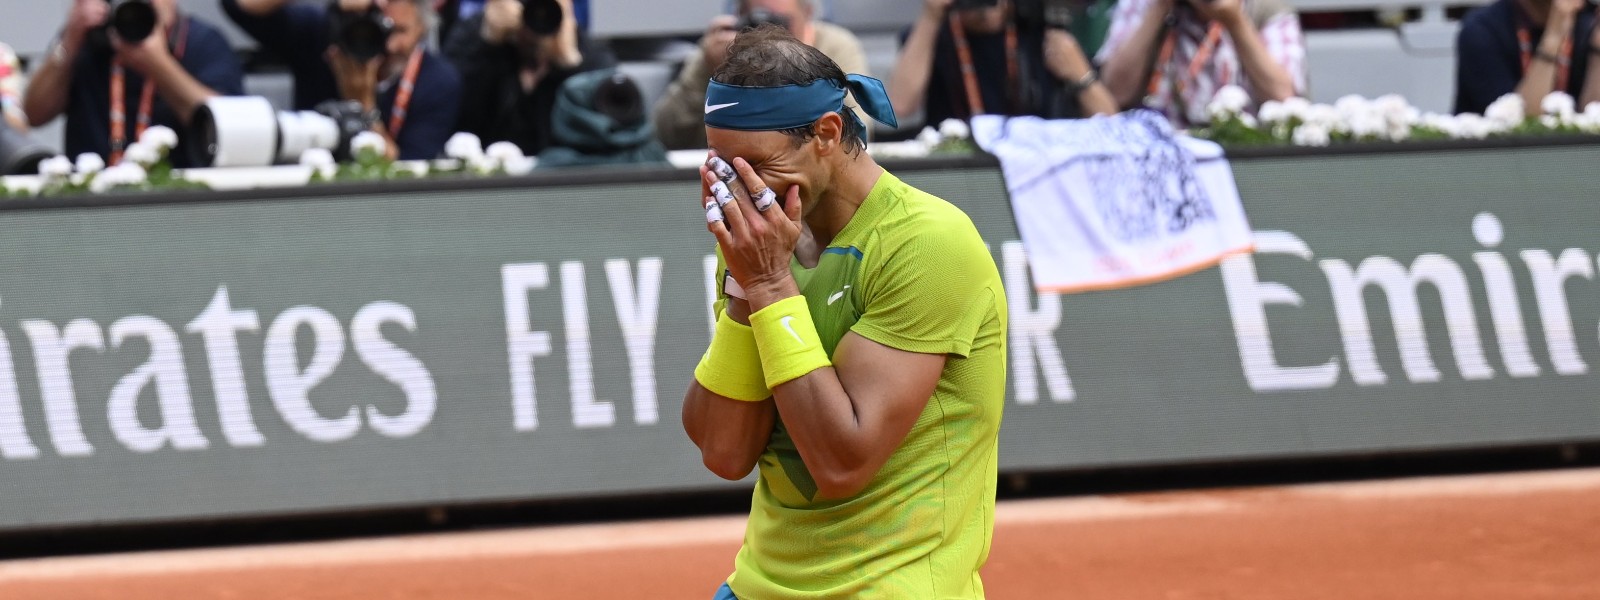 Rafael Nadal wins record-extending 14th French Open title